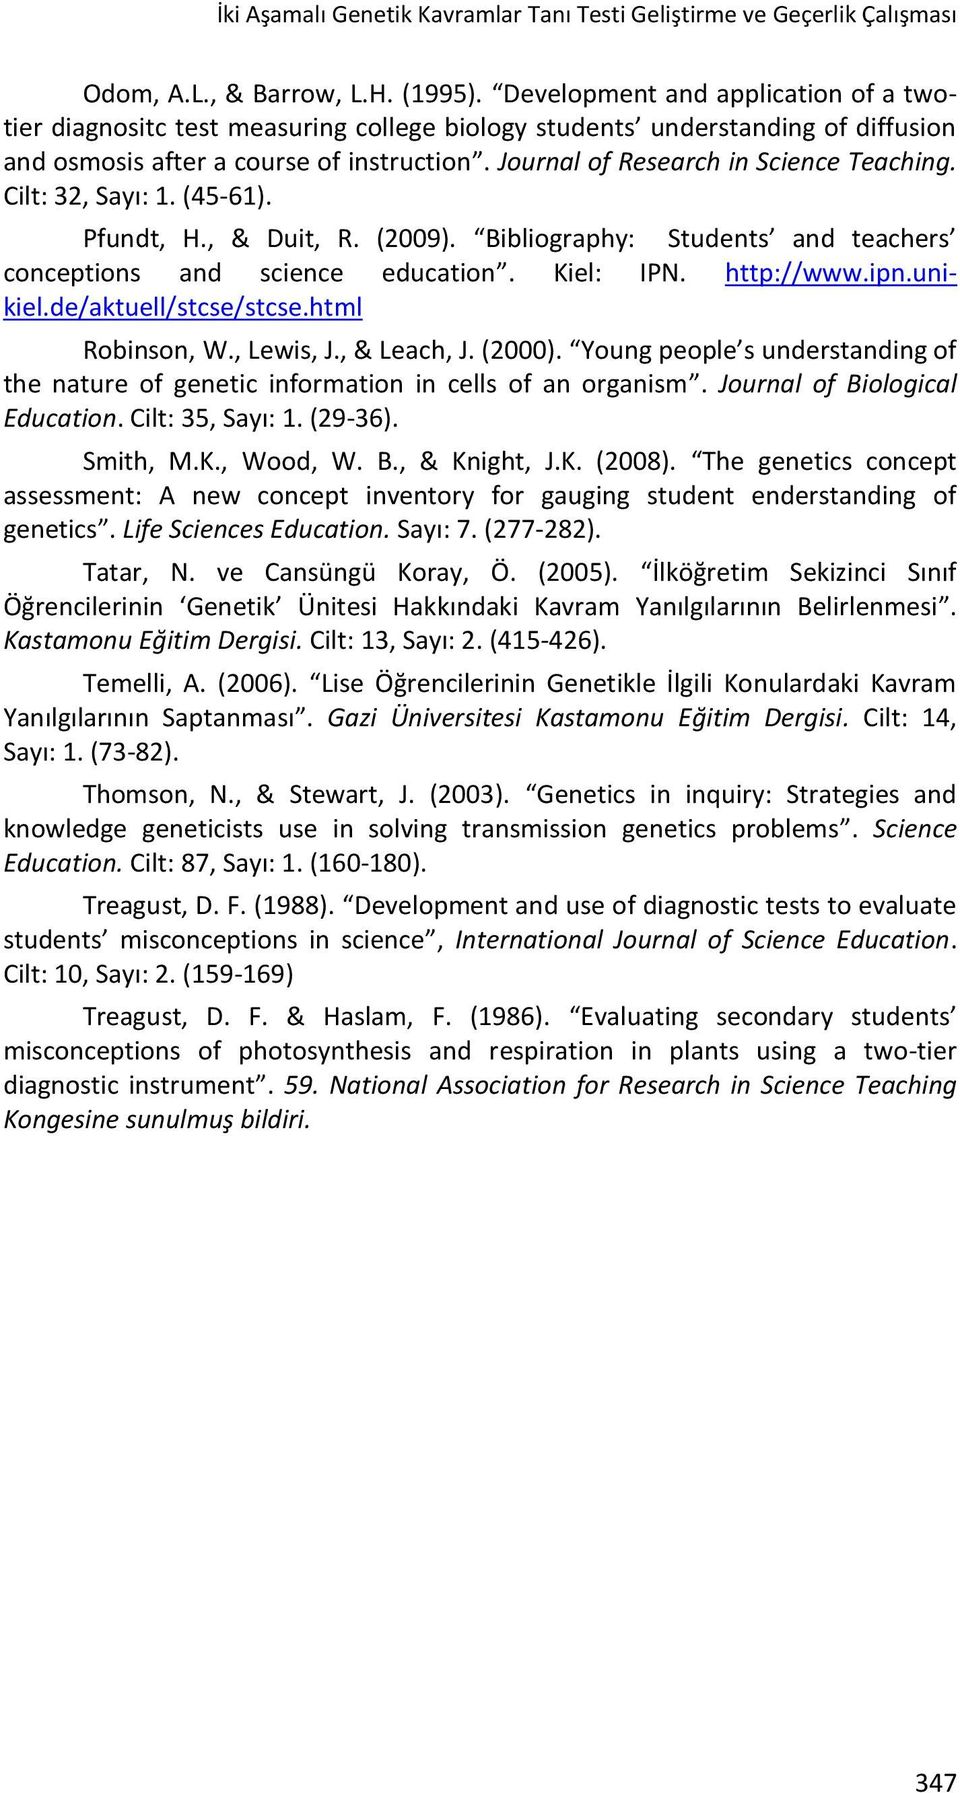 Journal of Research in Science Teaching. Cilt: 32, Sayı: 1. (45-61). Pfundt, H., & Duit, R. (2009). Bibliography: Students and teachers conceptions and science education. Kiel: IPN. http://www.ipn.